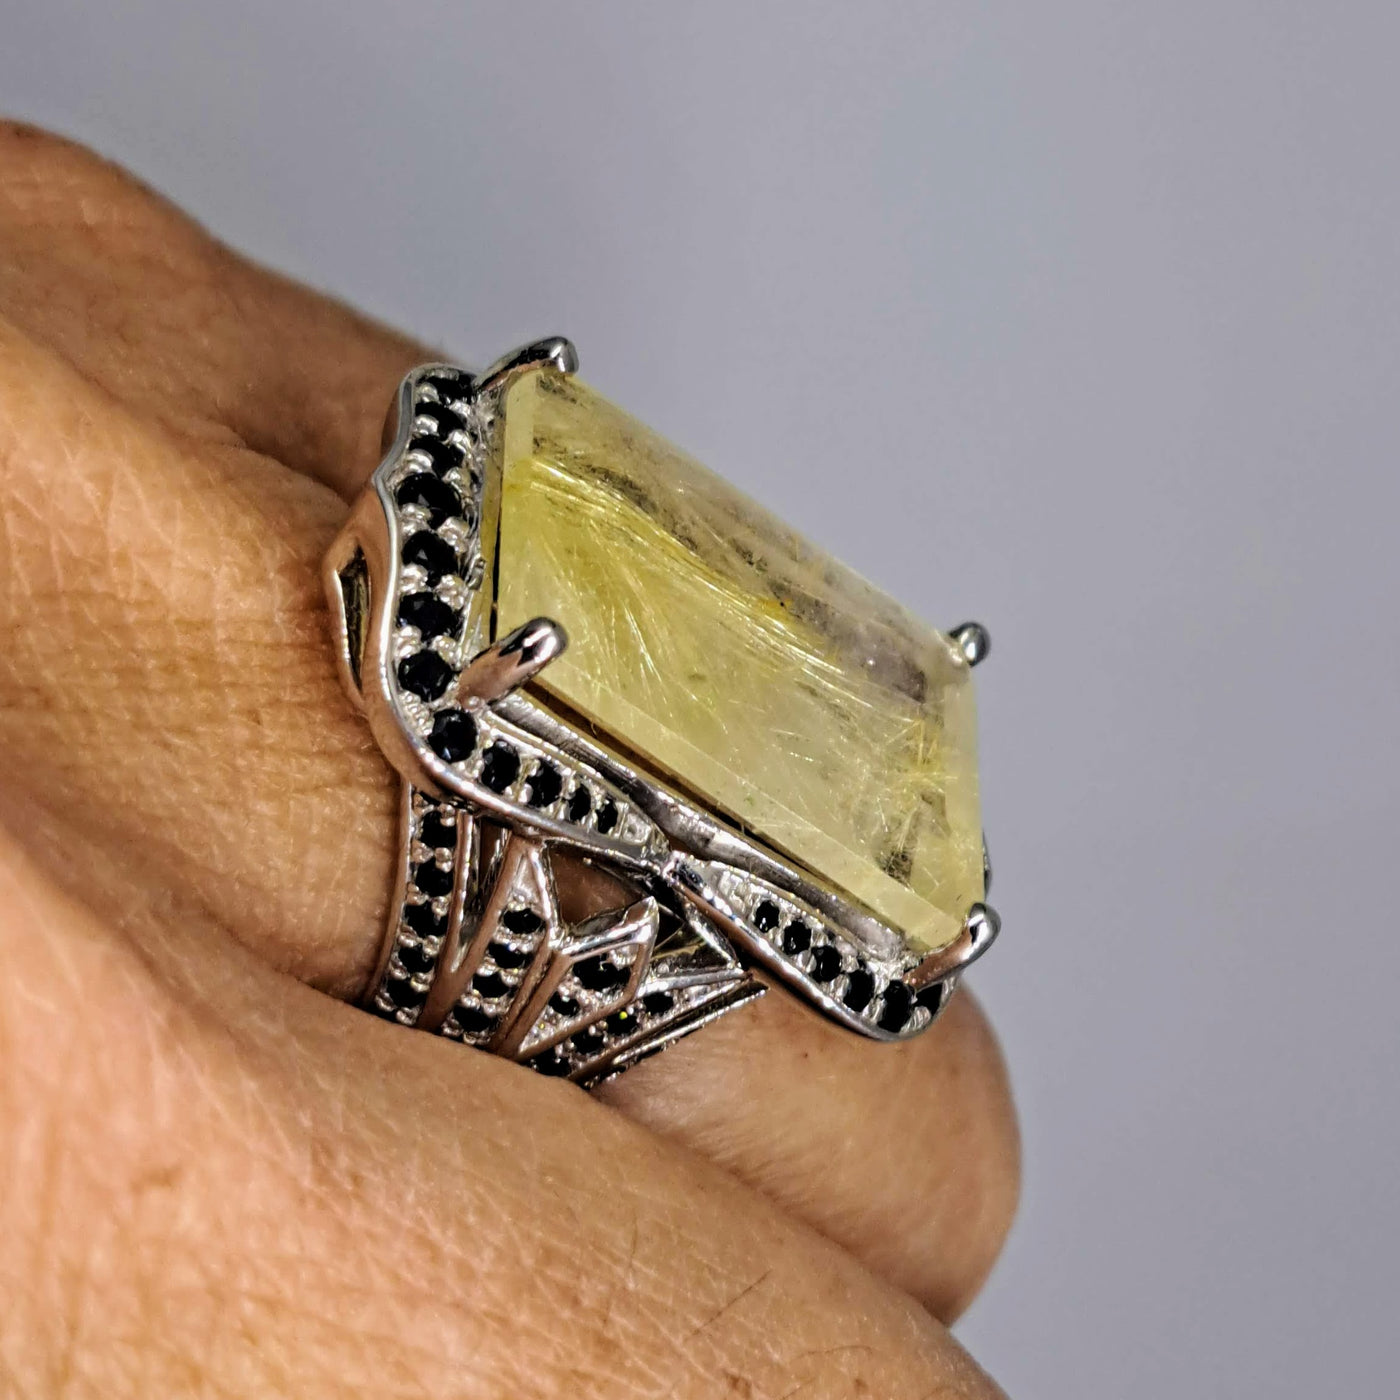 "Delicious Deco" Sz 7 Ring - Gold Rutilated Quartz, Spinel, Sterling